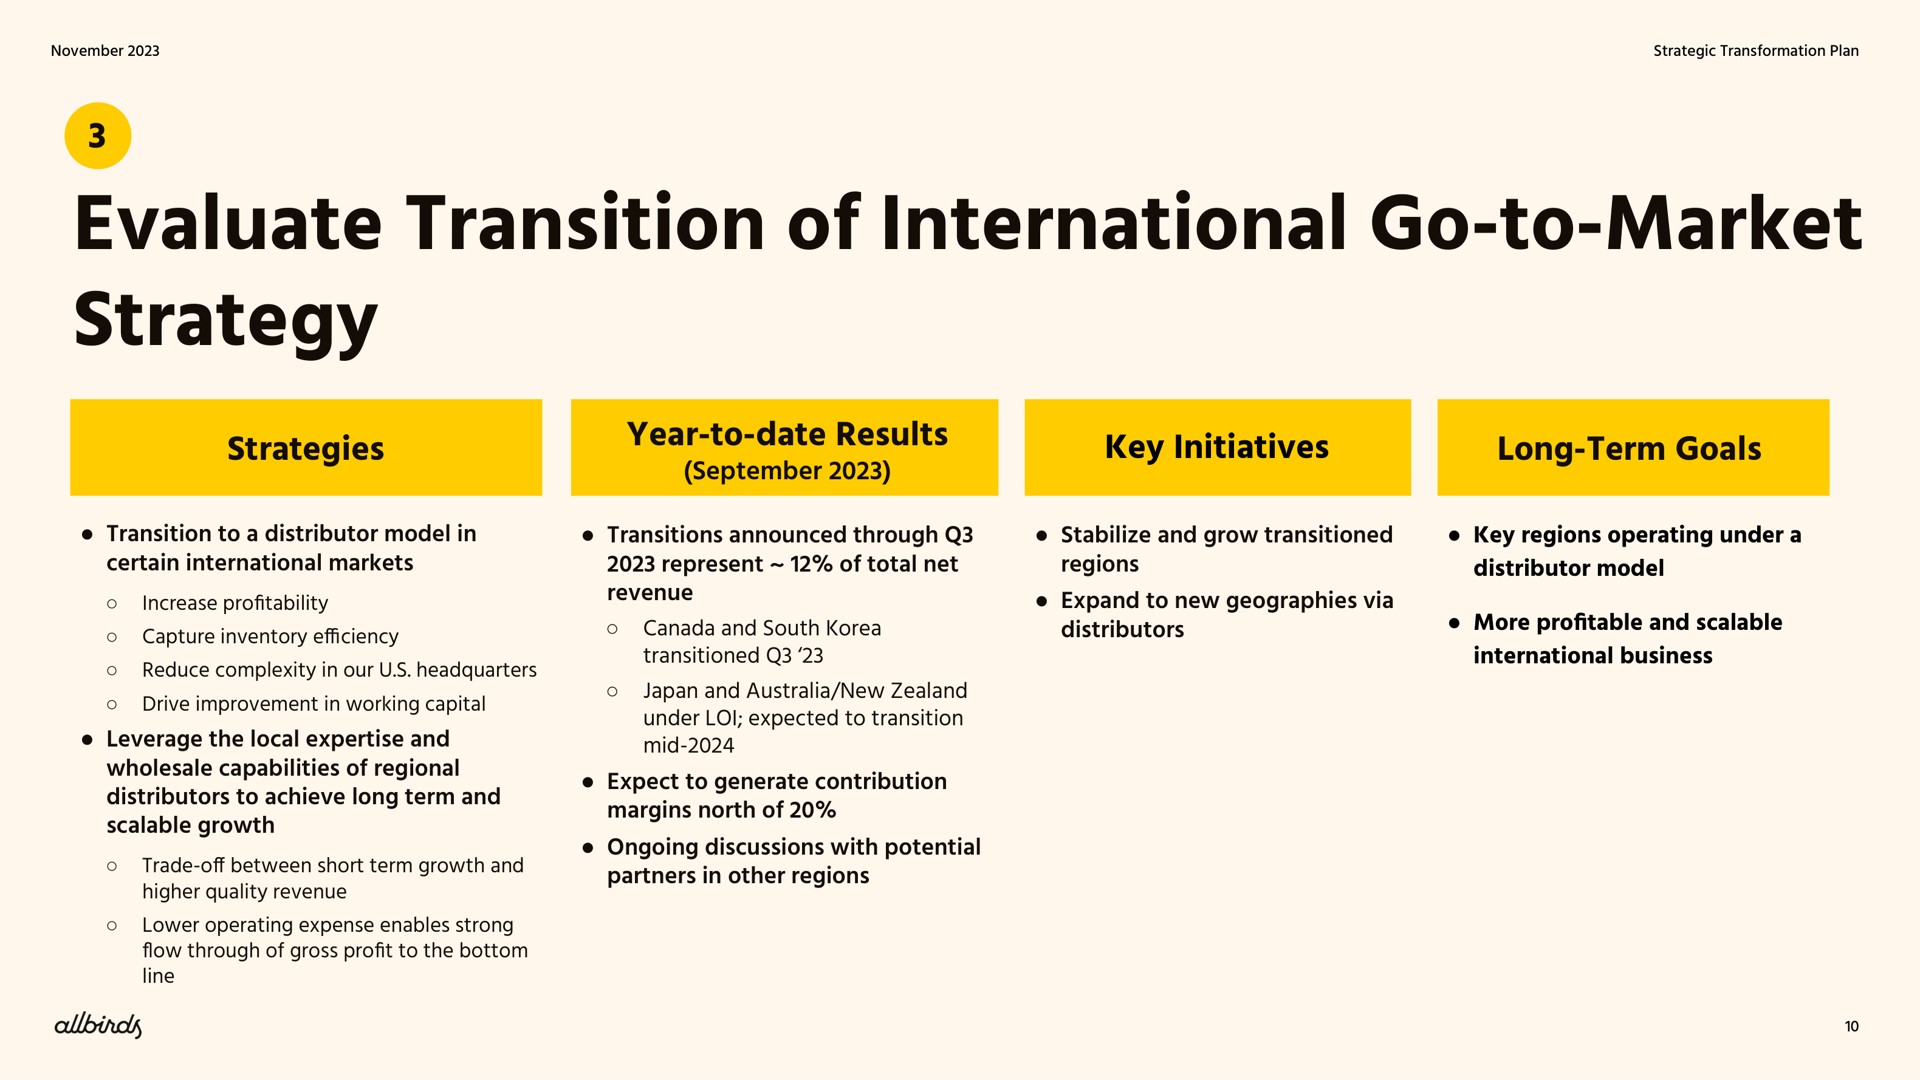 evaluate transition of international go to market strategy strategies transition to a distributor model in certain international markets increase pro capture inventory efficiency reduce complexity in our headquarters drive improvement in working capital leverage the local and wholesale capabilities of regional distributors to achieve long term and scalable growth trade off between short term growth and higher quality revenue lower operating expense enables strong through of gross pro to the bottom line year to date results transitions announced through represent of total net revenue canada and south transitioned japan and new under expected to transition mid expect to generate contribution margins north of ongoing discussions with potential partners in other regions key initiatives long term goals stabilize and grow transitioned key regions operating under a regions expand to new geographies via distributors distributor model more pro table and scalable international business profitability flow profit profitable | Allbirds